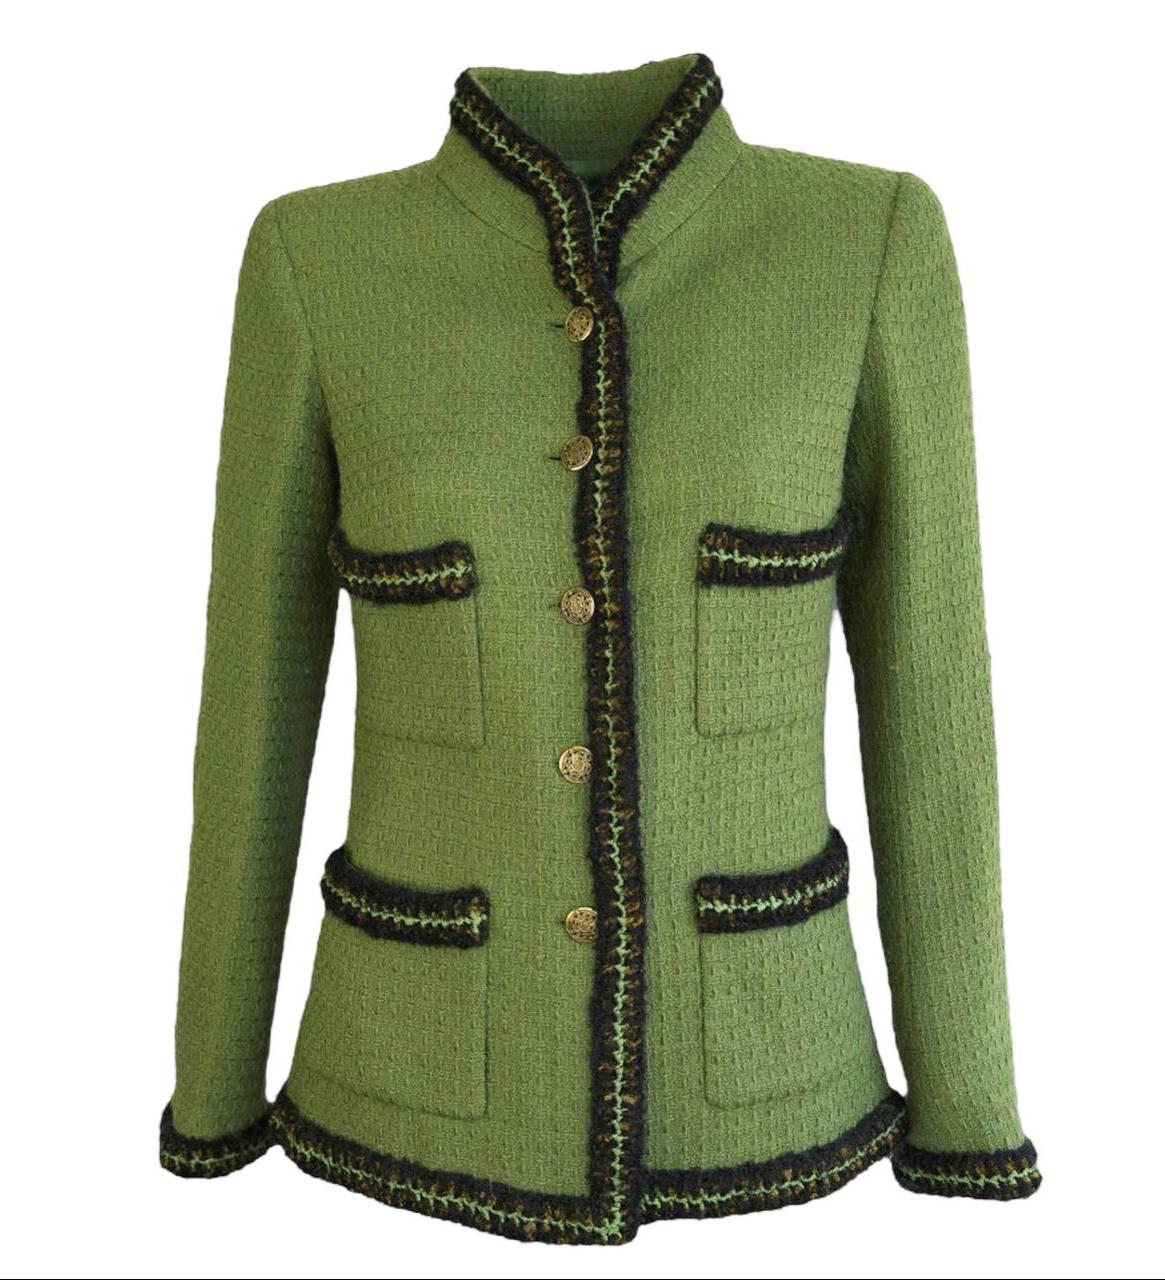 Women's or Men's Chanel Most Iconic Green Tweed Jacket from Ad Campaign For Sale